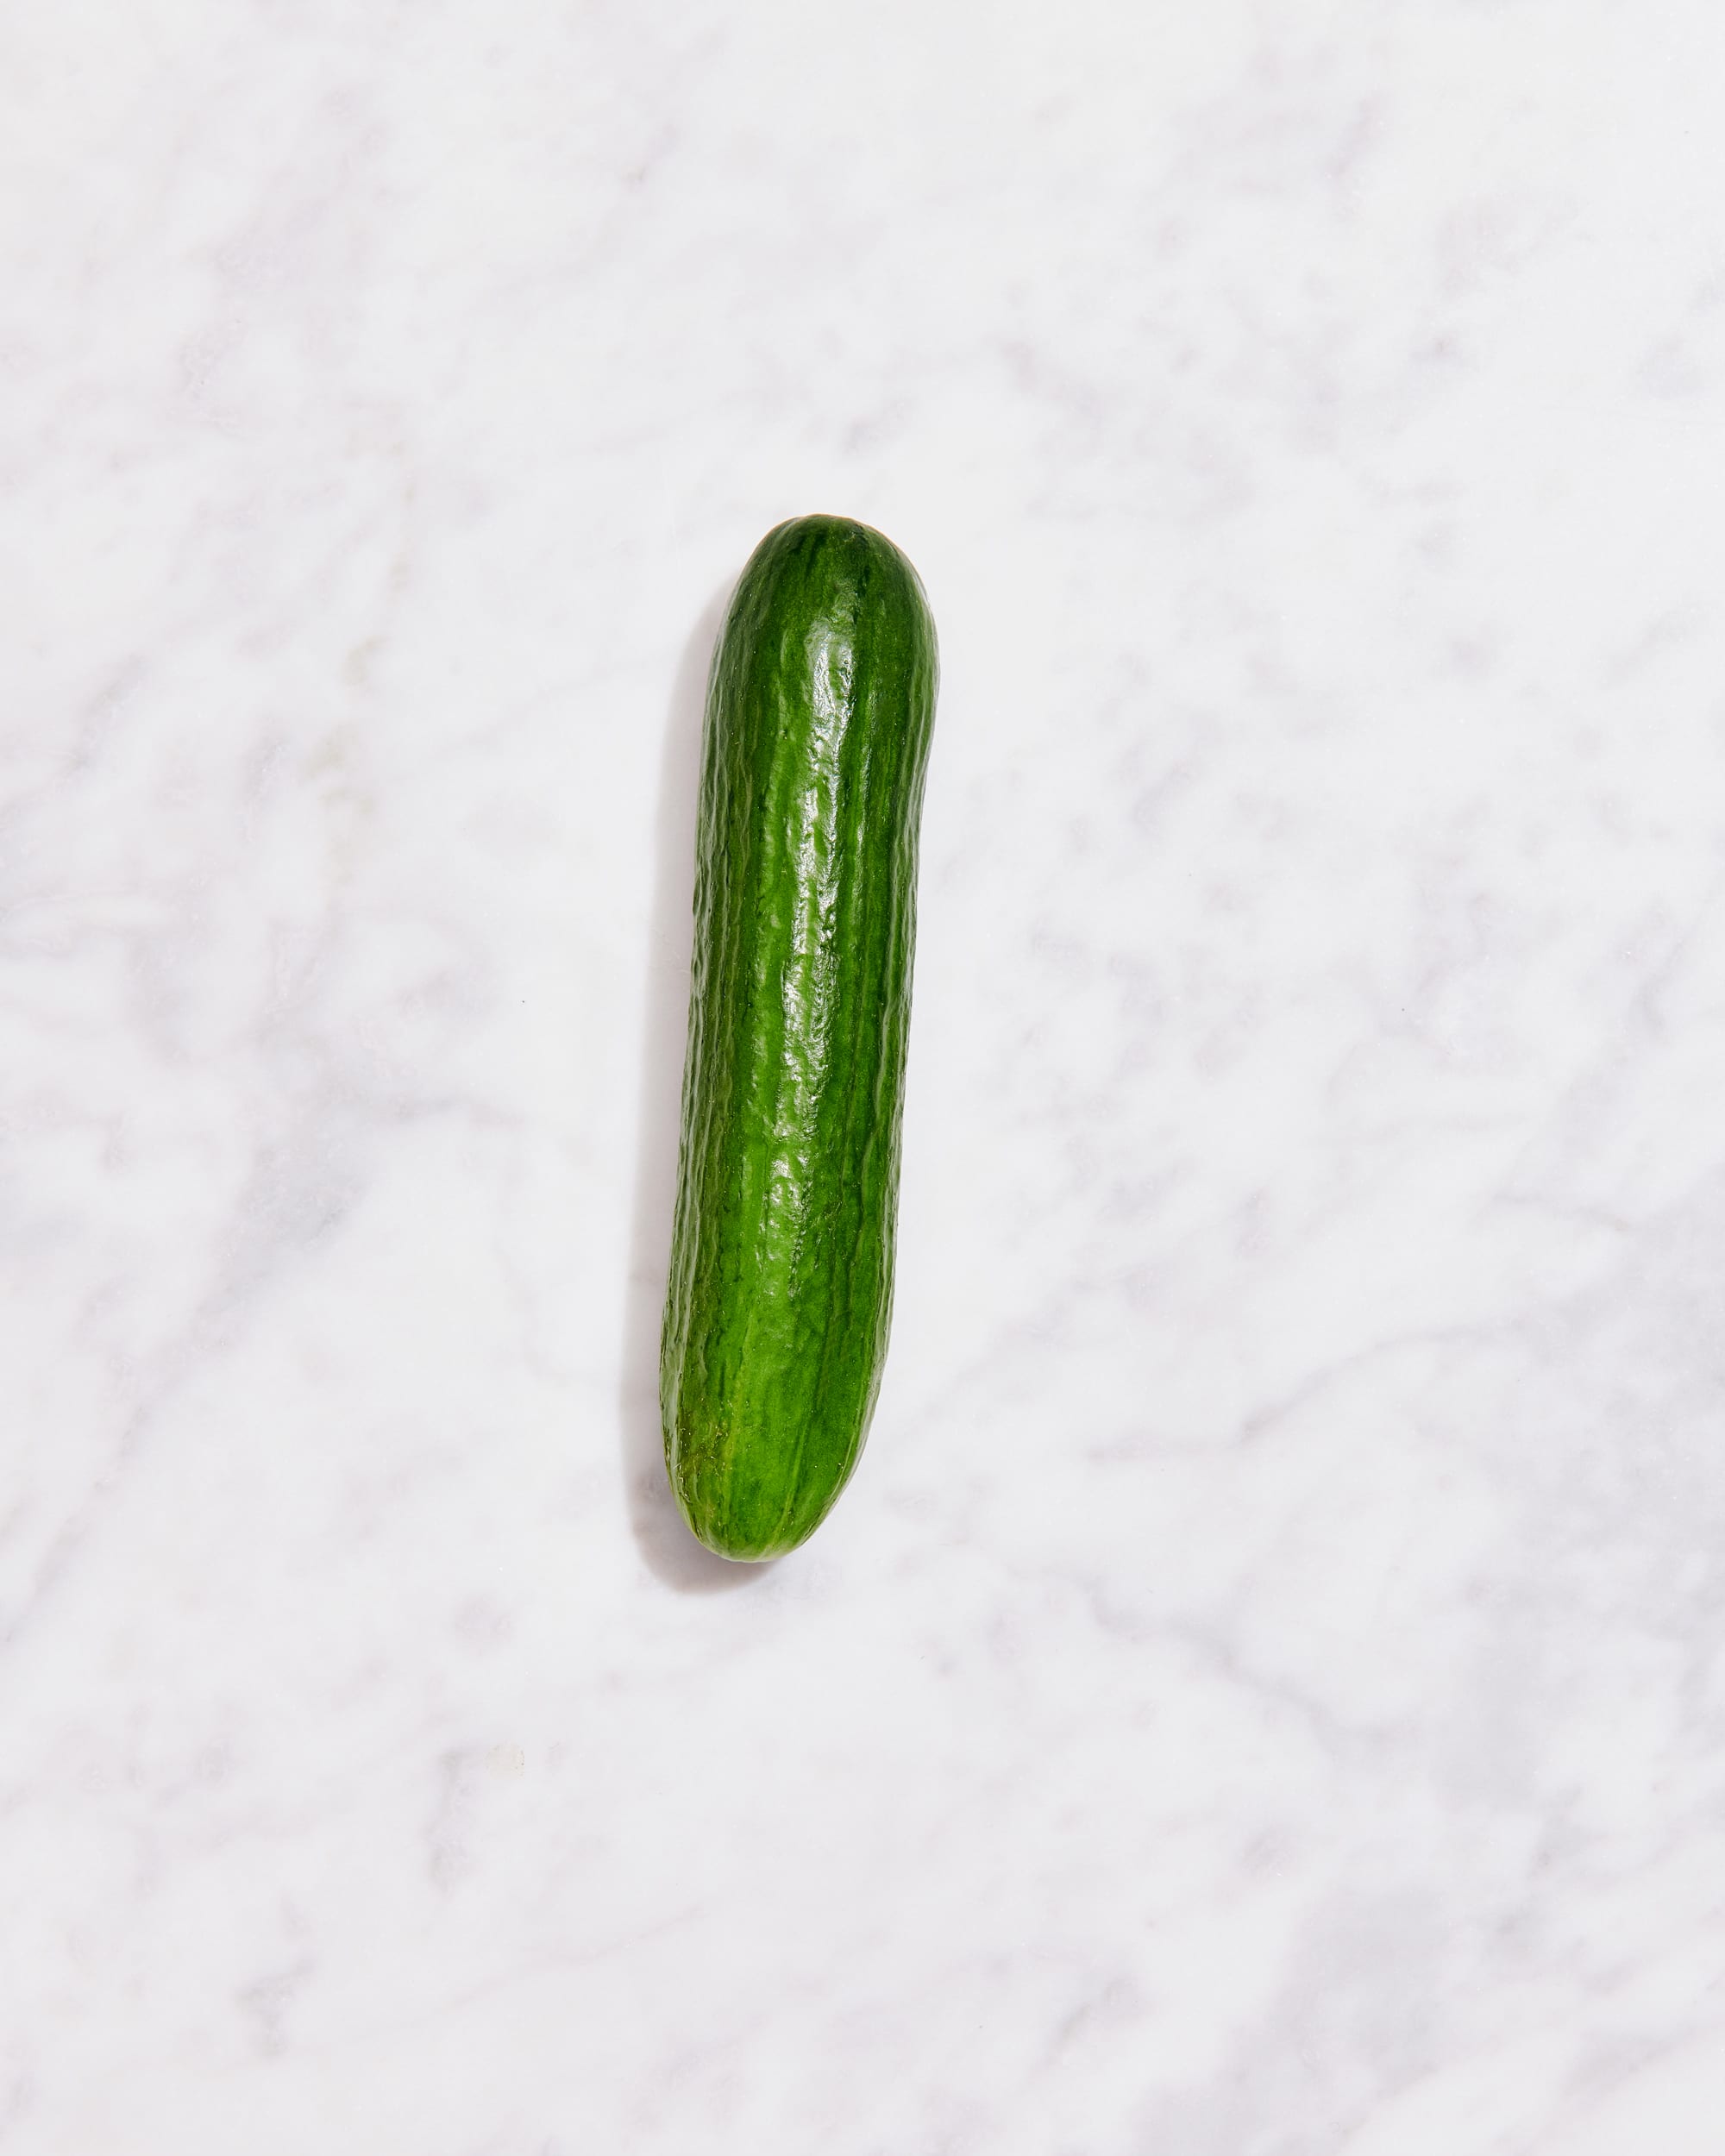 How to Buy, Use, and Store Cucumbers